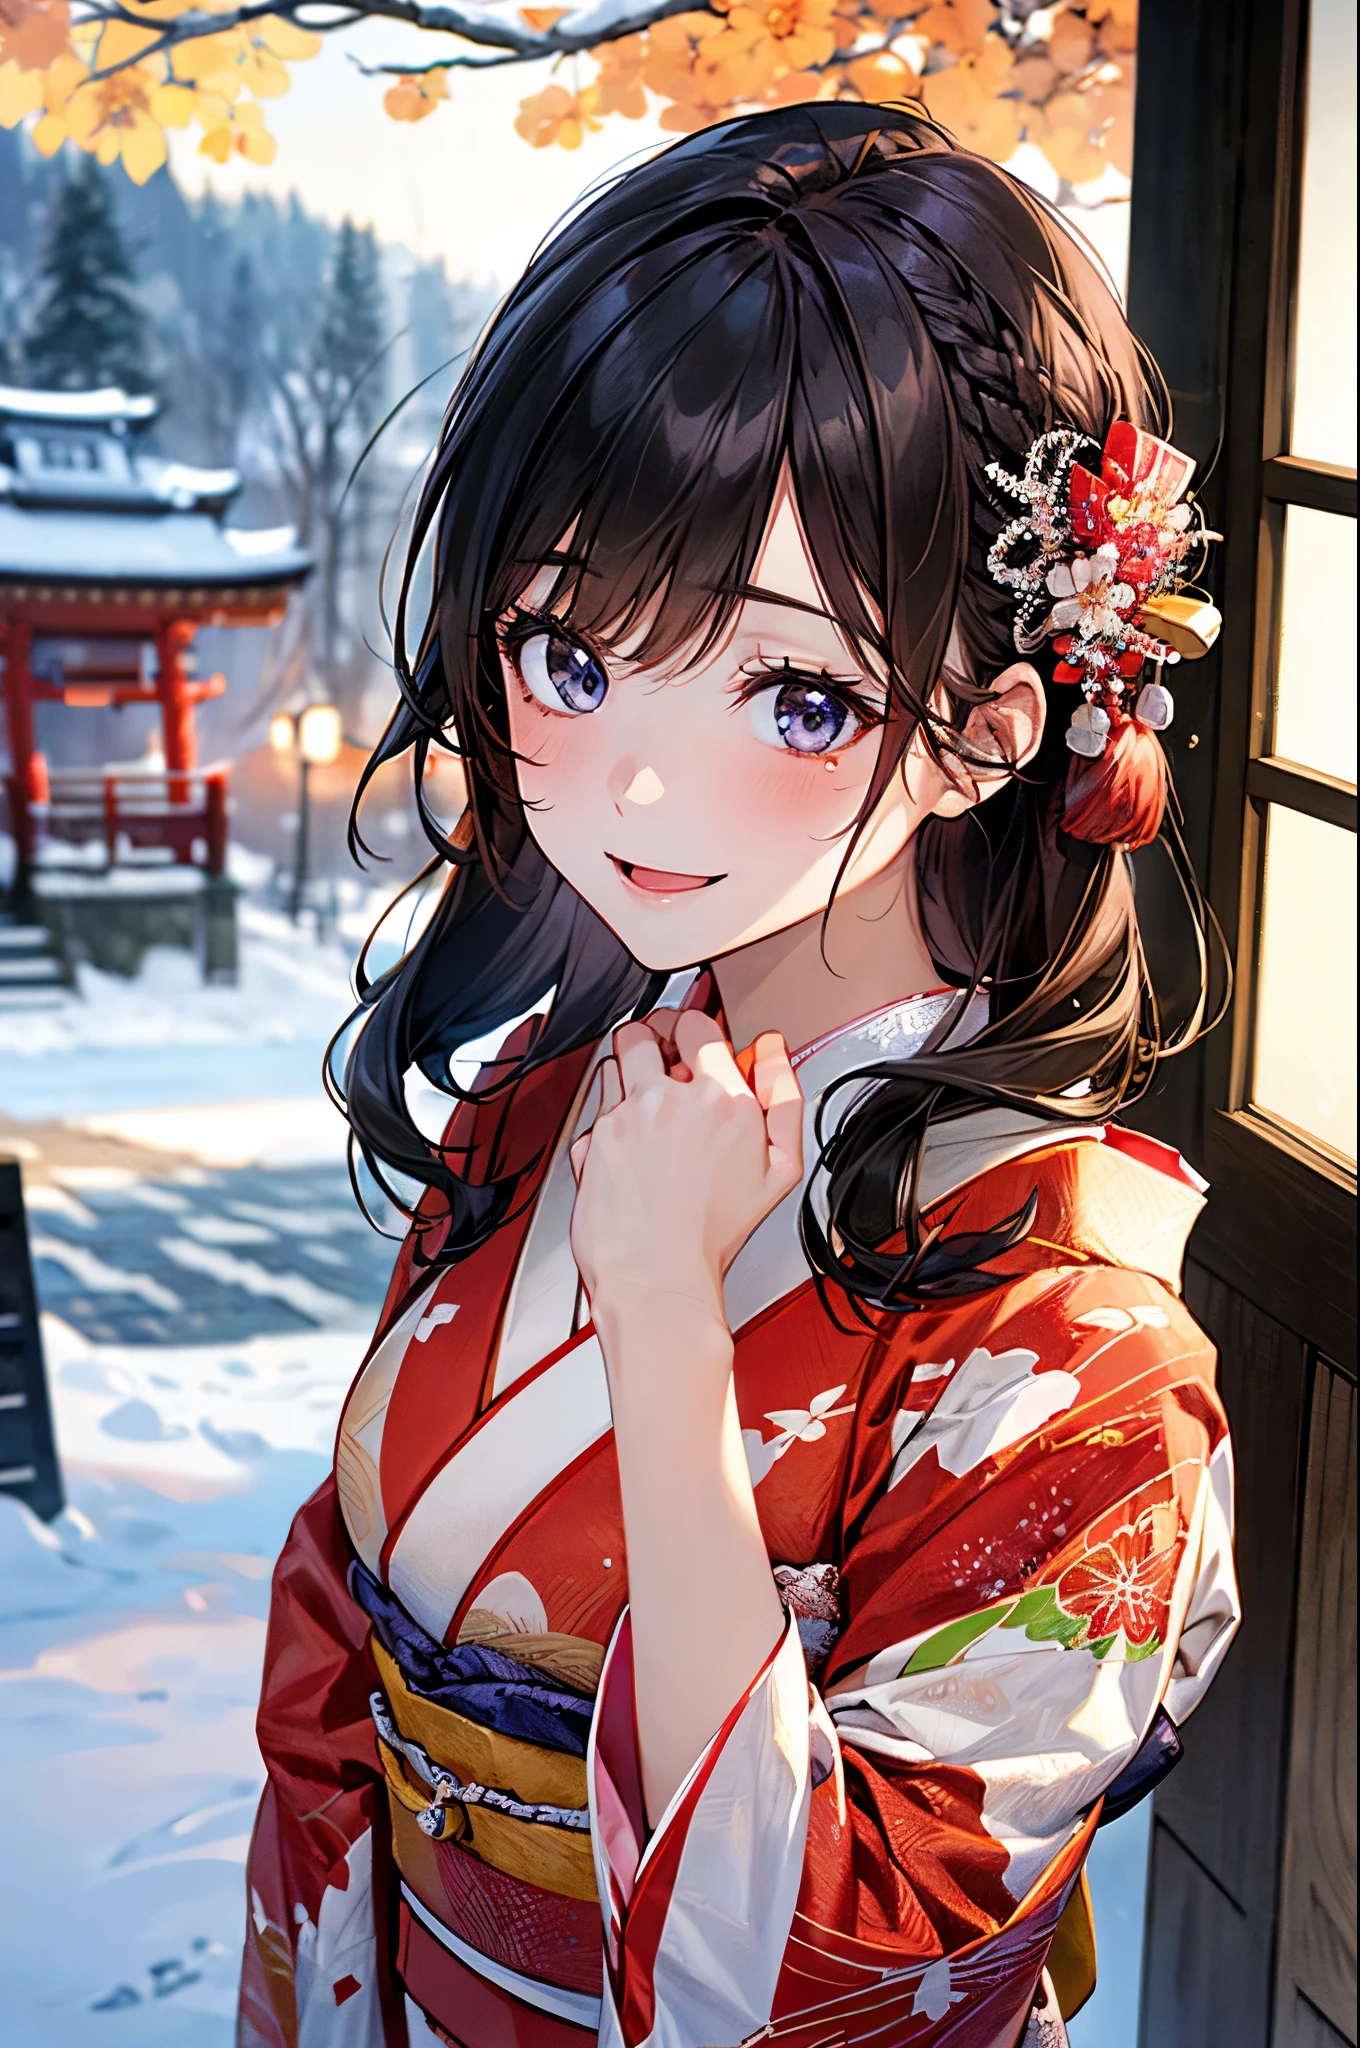 ((perfect anatomy, anatomically correct, super detailed skin)), 
1 girl, japanese, high school girl, shiny skin, large breasts:0.5, looking up, watching the view, 
beautiful hair, beautiful face, beautiful detailed eyes, (middle hair:1.5, japanese hair:1.5), black hair, blue eyes, babyface, mole under eye, 
(((floral luxury red kimono), hair ornament)), 
((smile:1.5, open your mouth wide)), walking, 
(beautiful scenery), winter, dawn, (new year's day, first visit), hokkaido, sapporo, outside hokkaido shrine, crowd, snow, snowfall:1.5, freezing weather, frost, 
(8k, top-quality, masterpiece​:1.2, extremely detailed), (photorealistic), beautiful illustration, natural lighting,